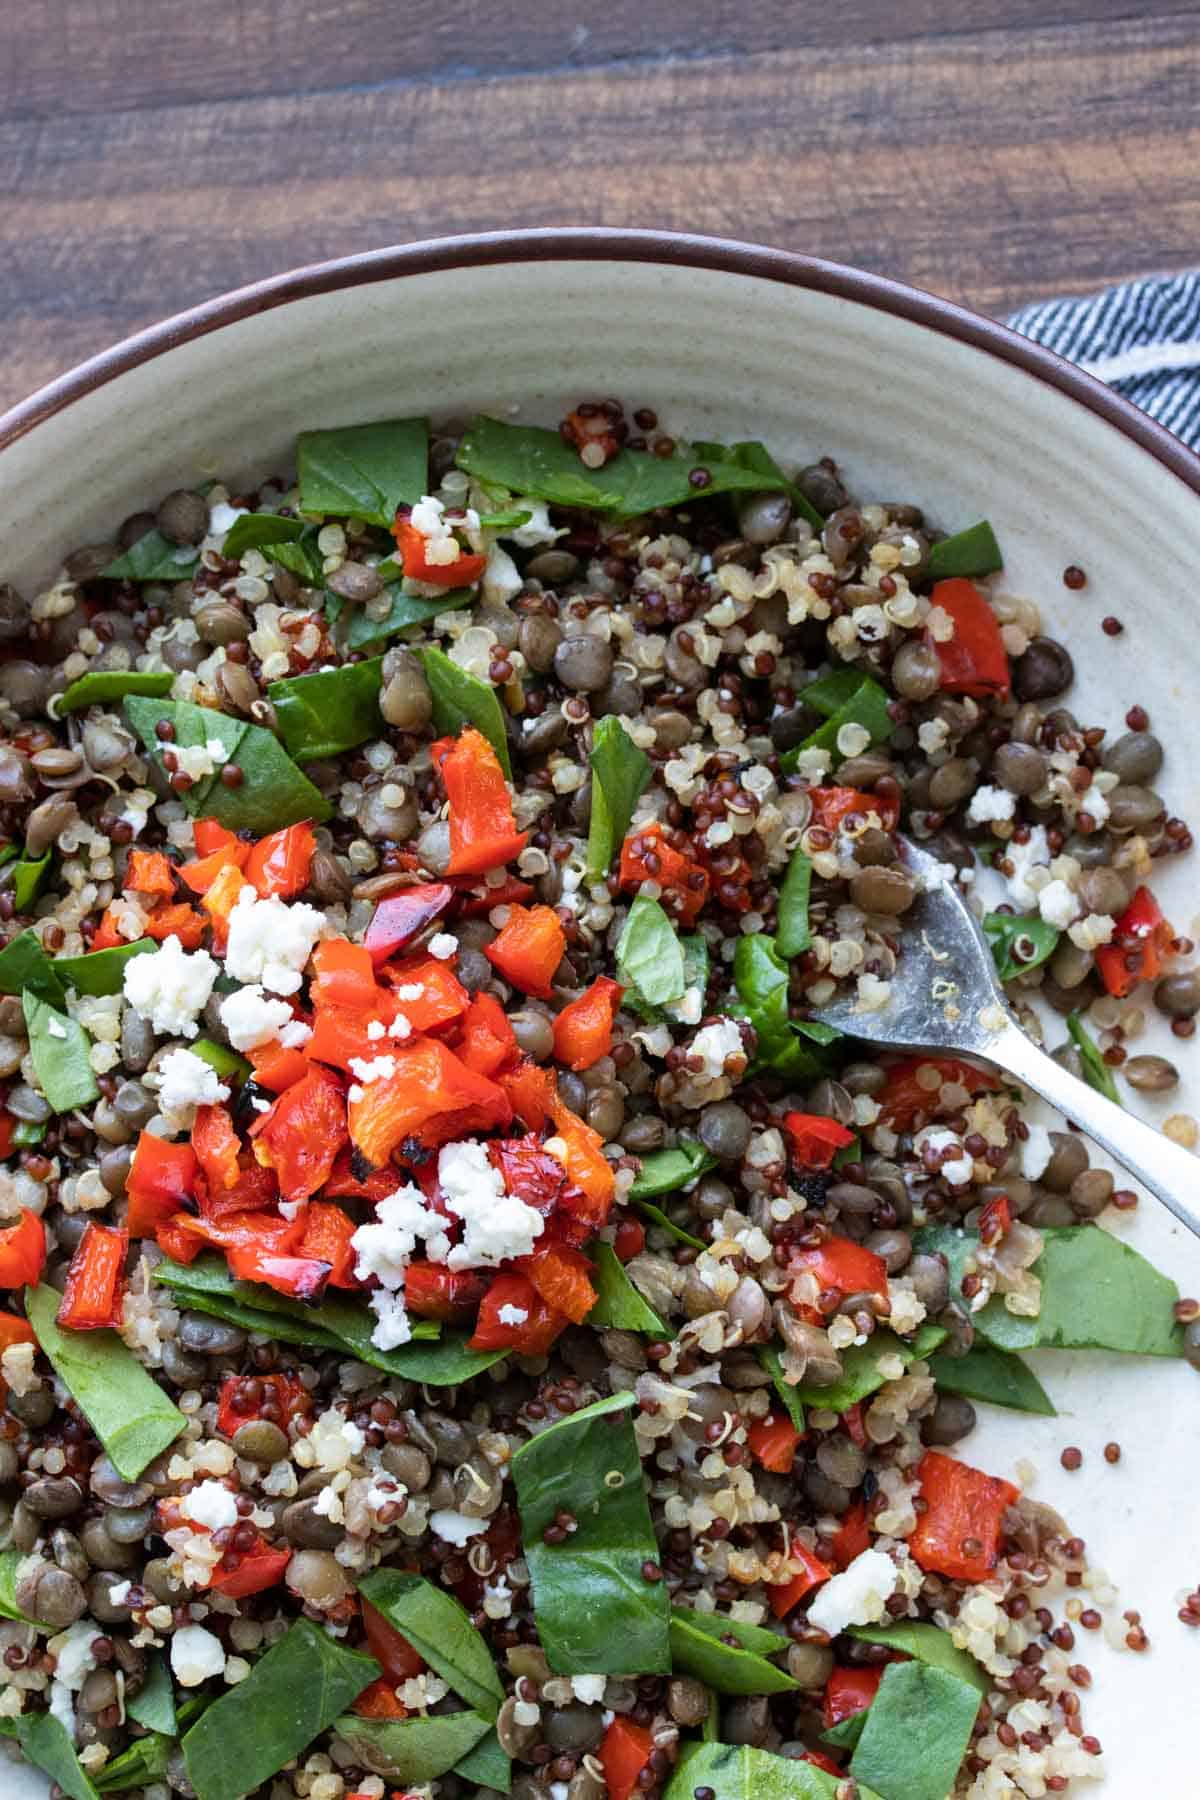 For getting a bite of lentil quinoa salad from a white bowl